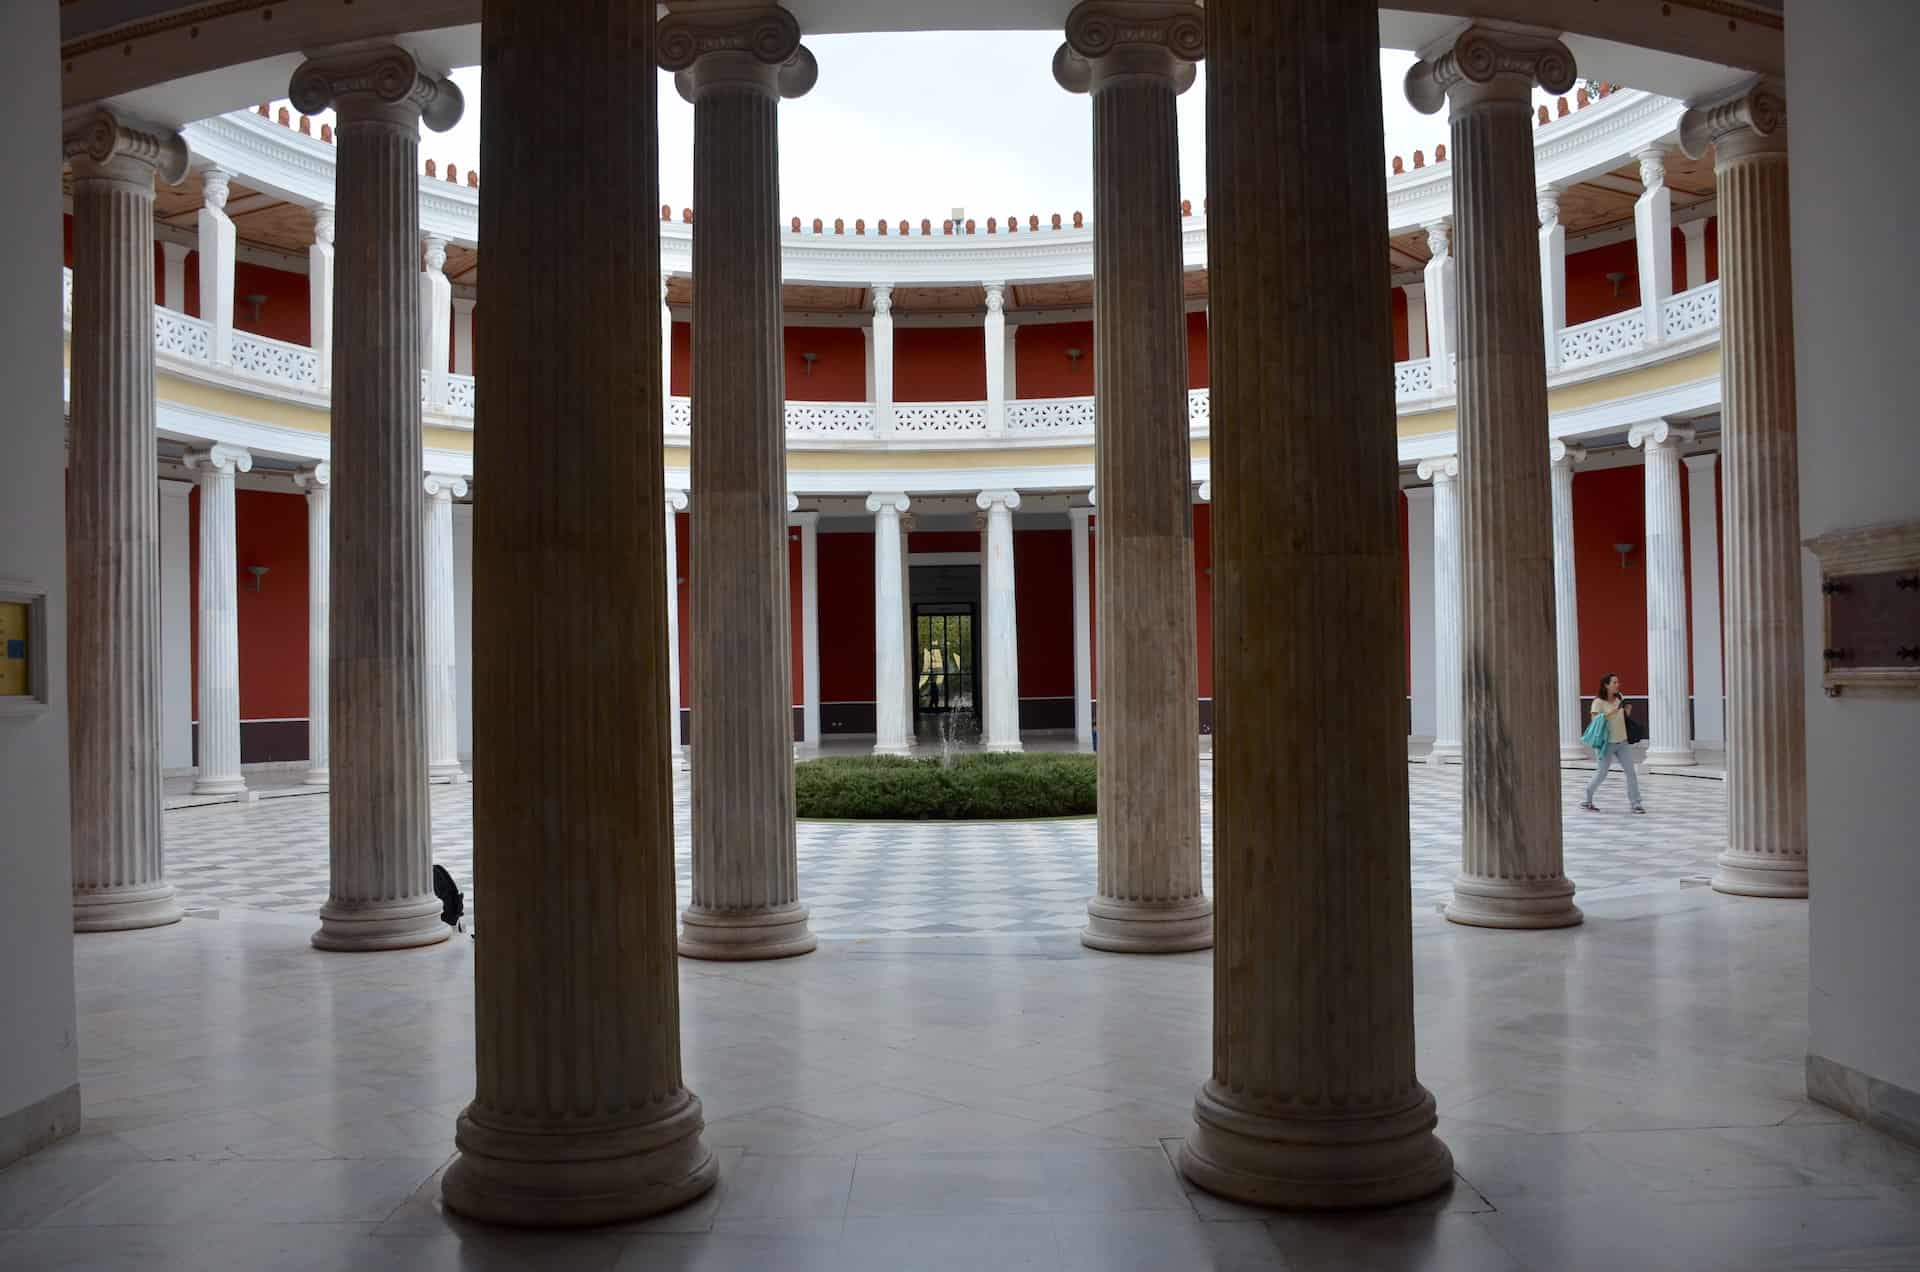 Atrium at the Zappeion in Athens, Greece